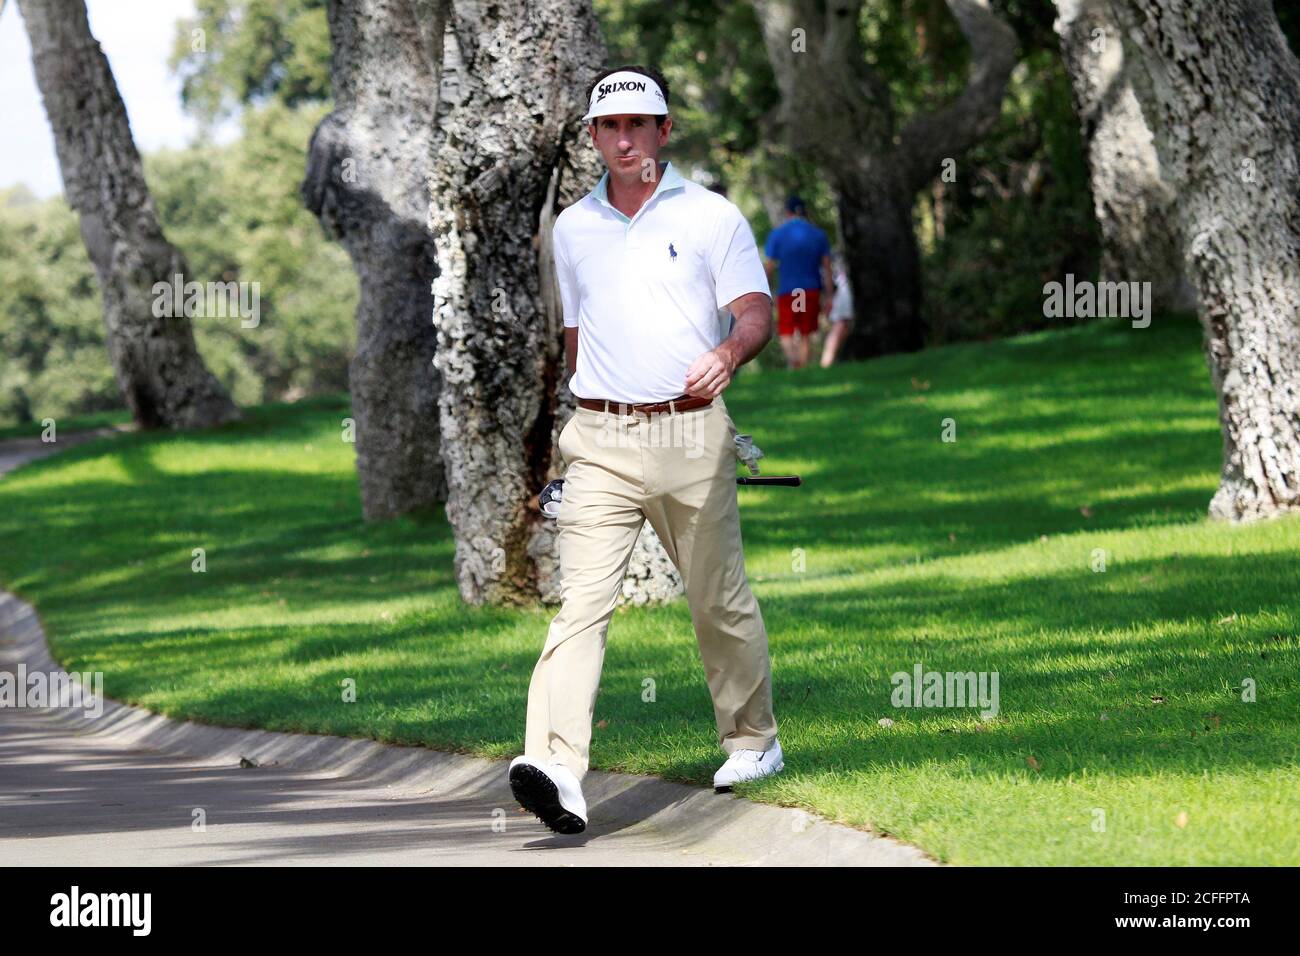 Spanish golfer Gonzalo Fernandez Castano walks toward the start of hole 2  during the third day of Andalusias' Pro-Am Golf Masters tournament at  Valderrama golf course in Sotogrande town, Cadiz, southern Spain,